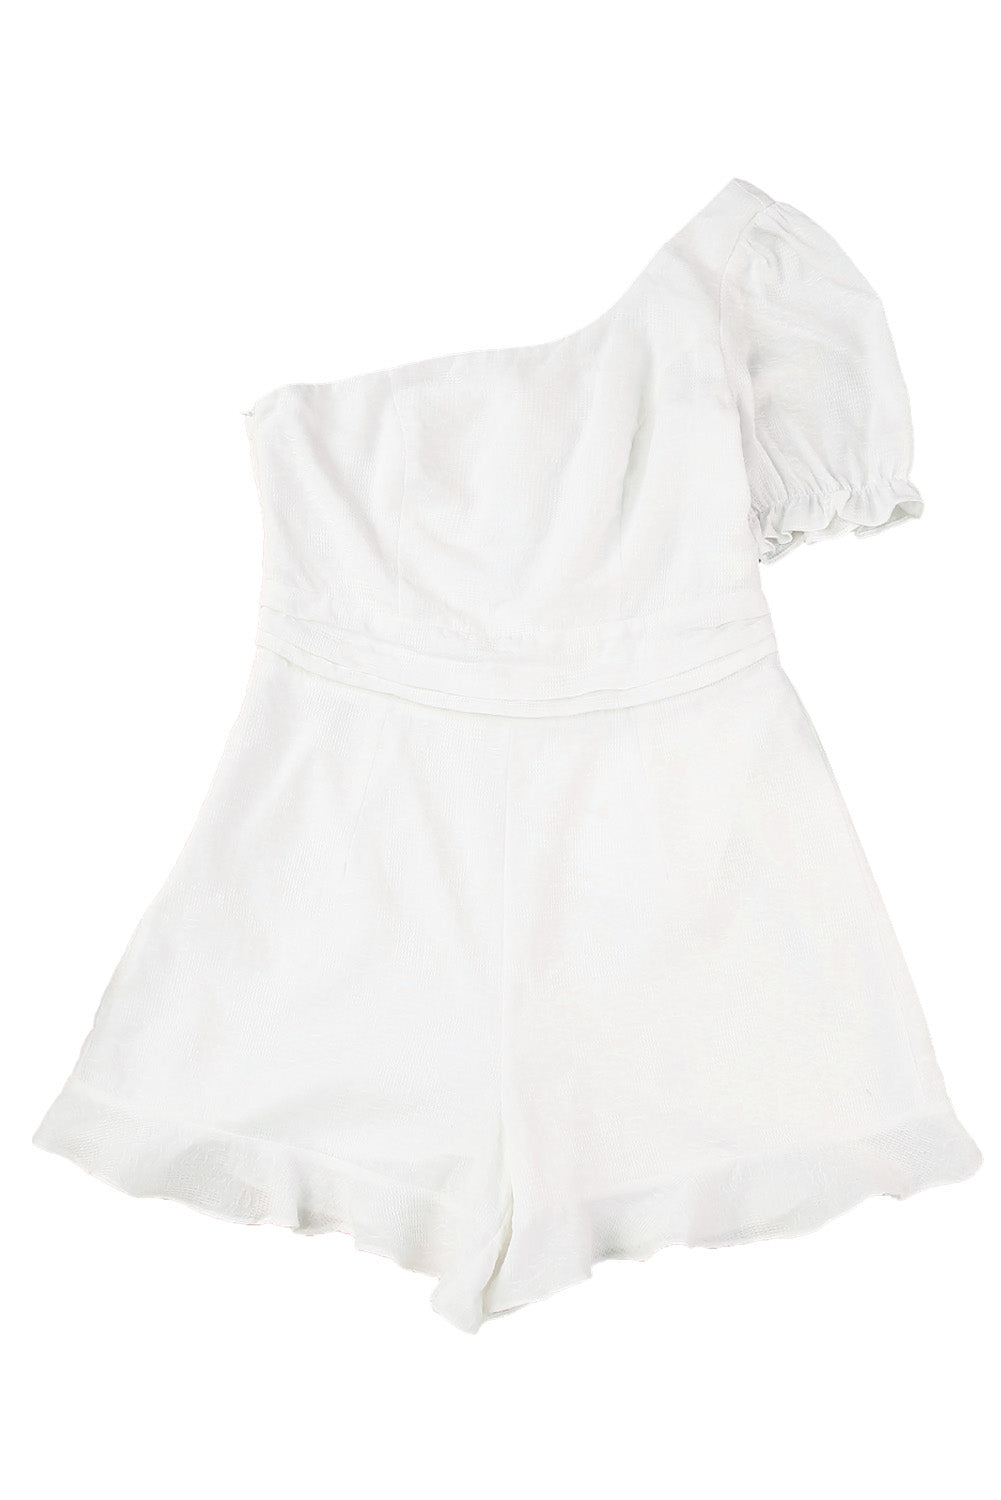 White One-shoulder Puff Sleeves Romper with Ruffle Trim Jumpsuits & Rompers JT's Designer Fashion